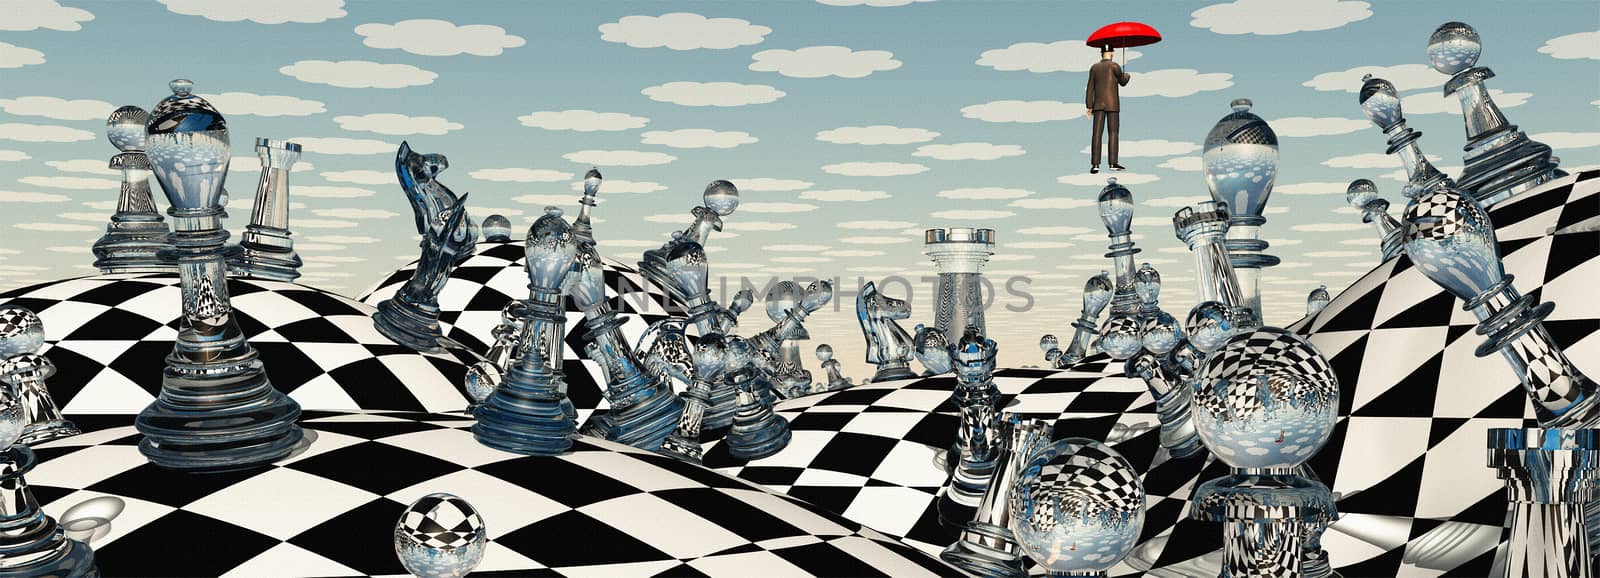 Surreal chess landscape and hovering man with red umbrella